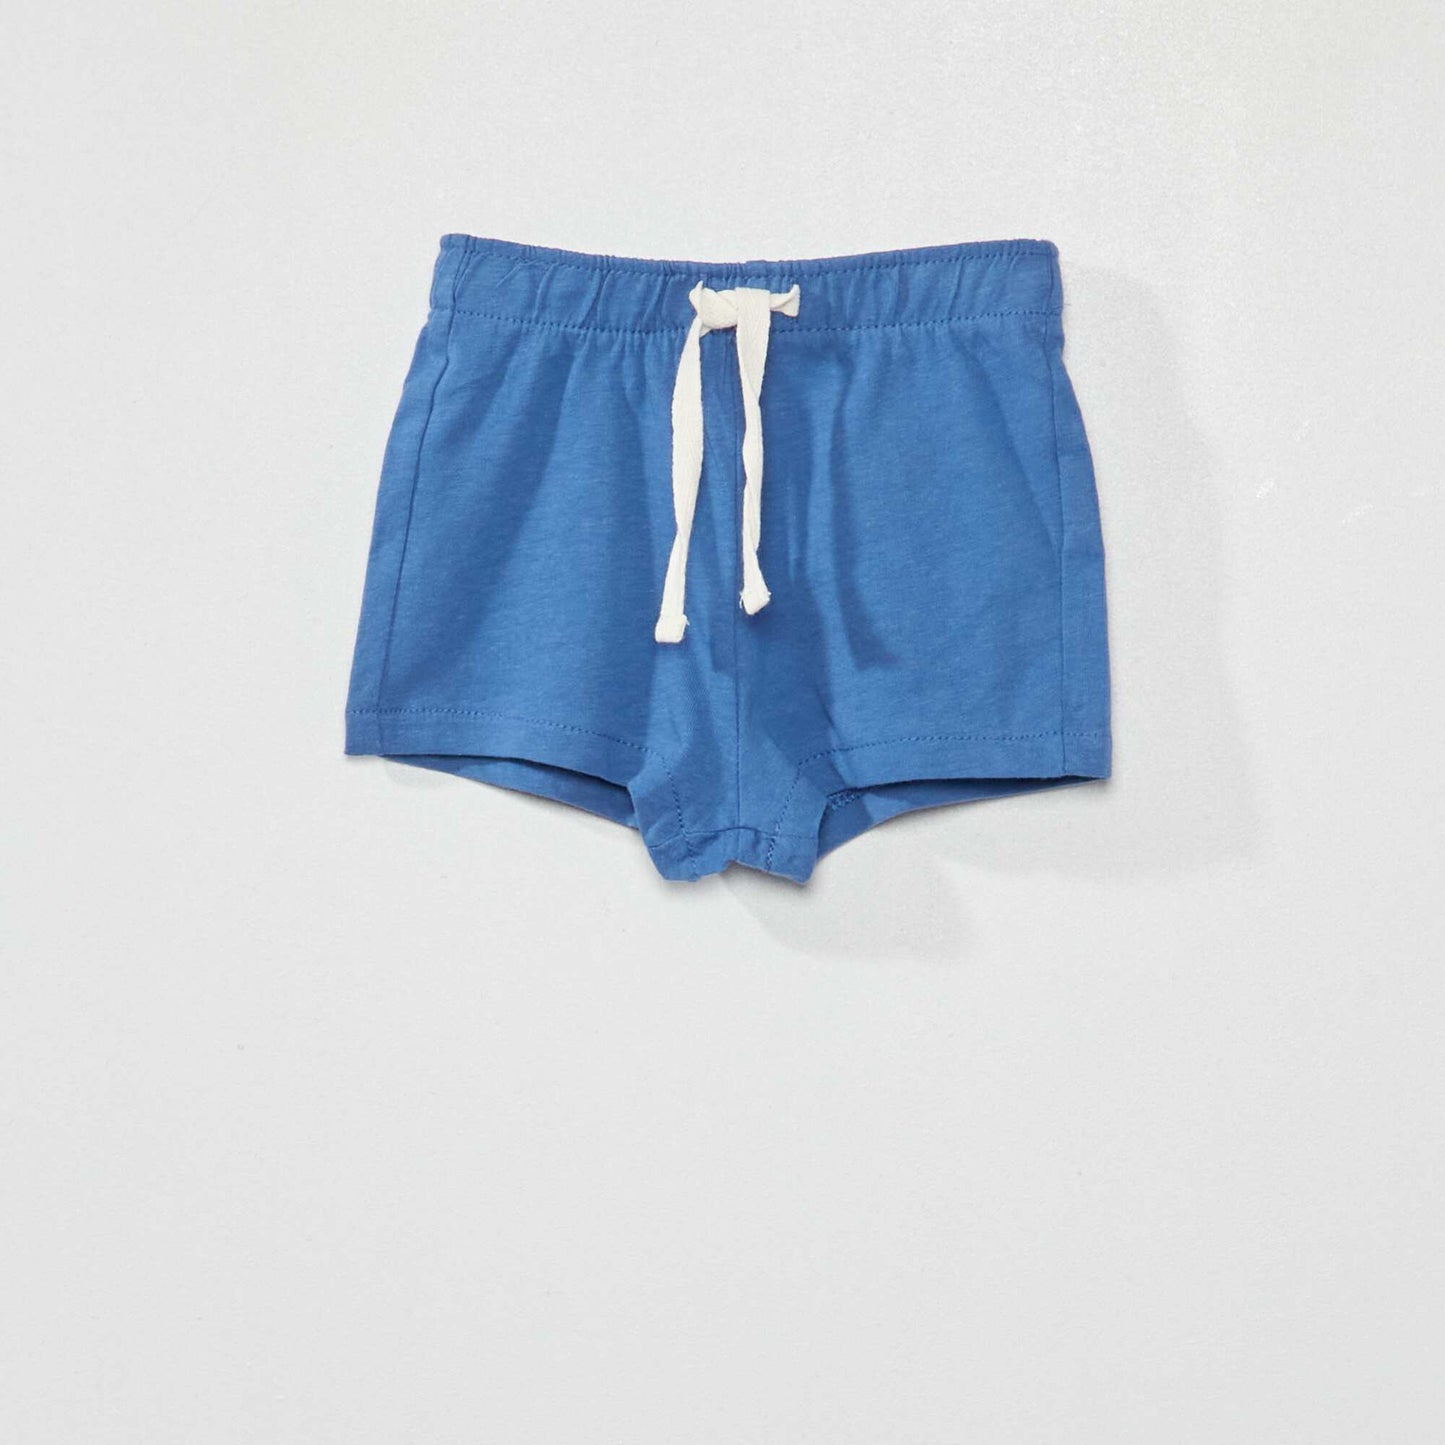 2 pairs of jersey shorts BLUE